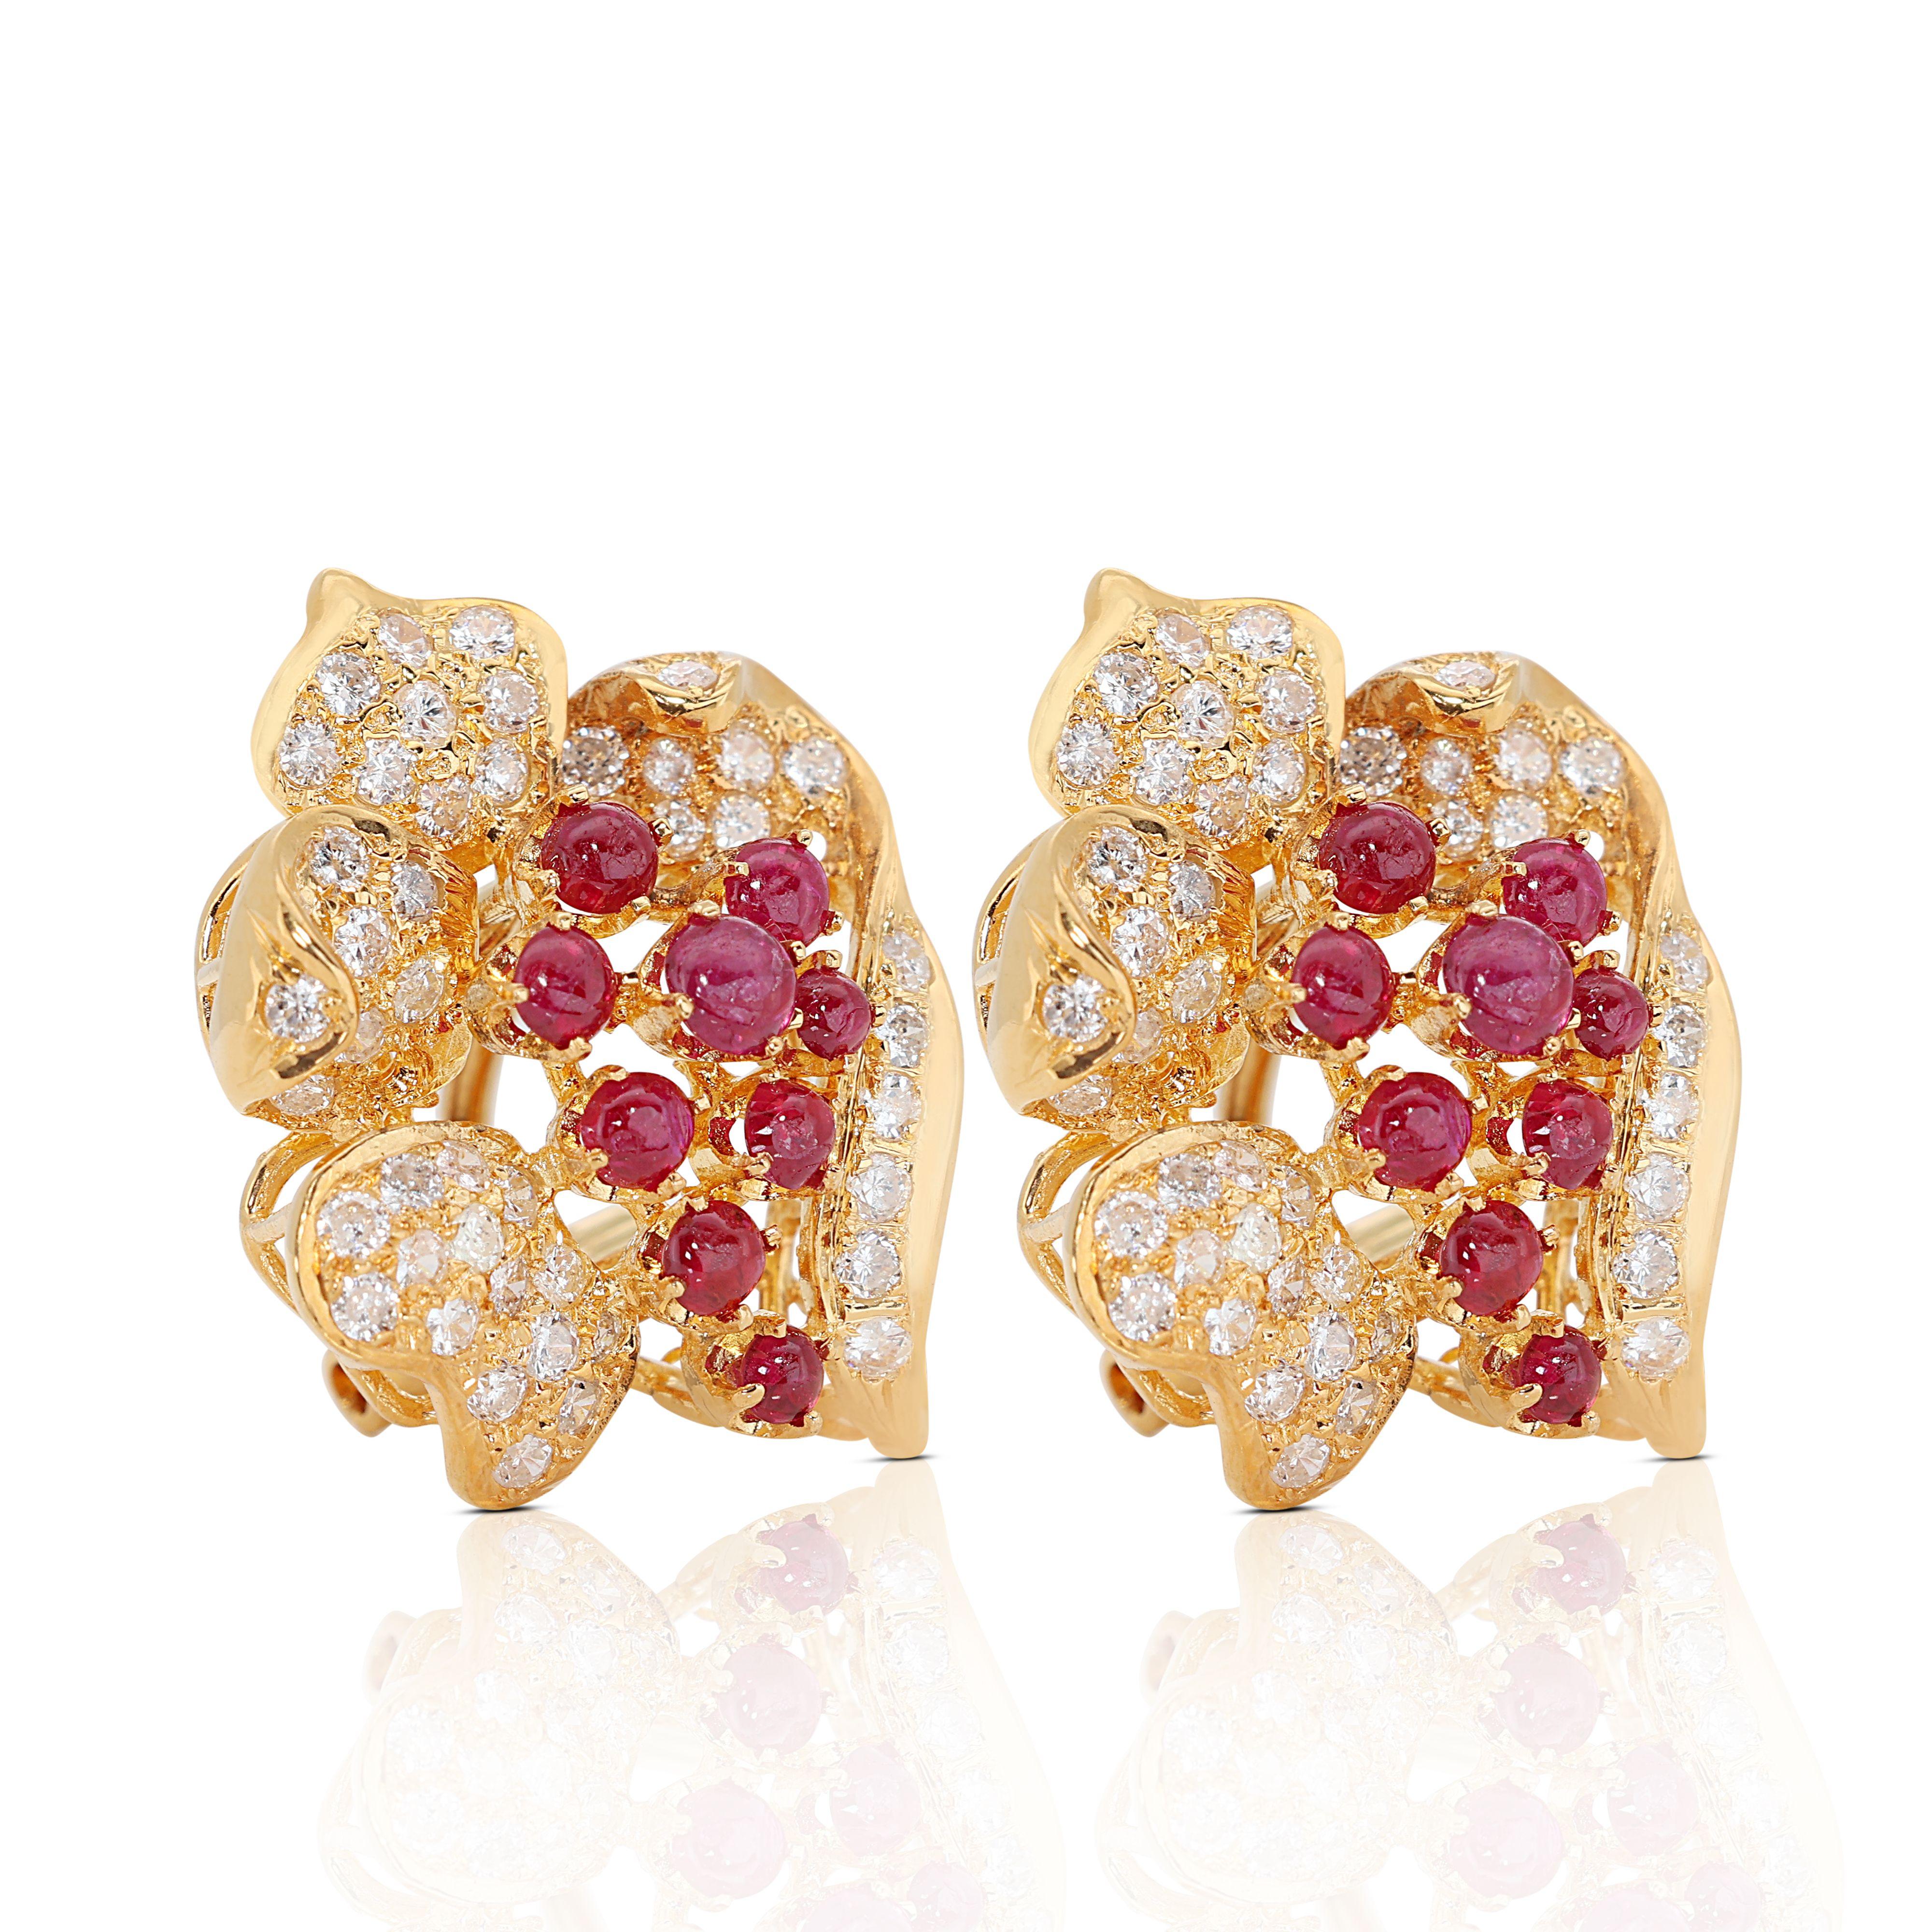 Cabochon Captivating 0.90ct Ruby Earrings set in 18K Yellow Gold For Sale